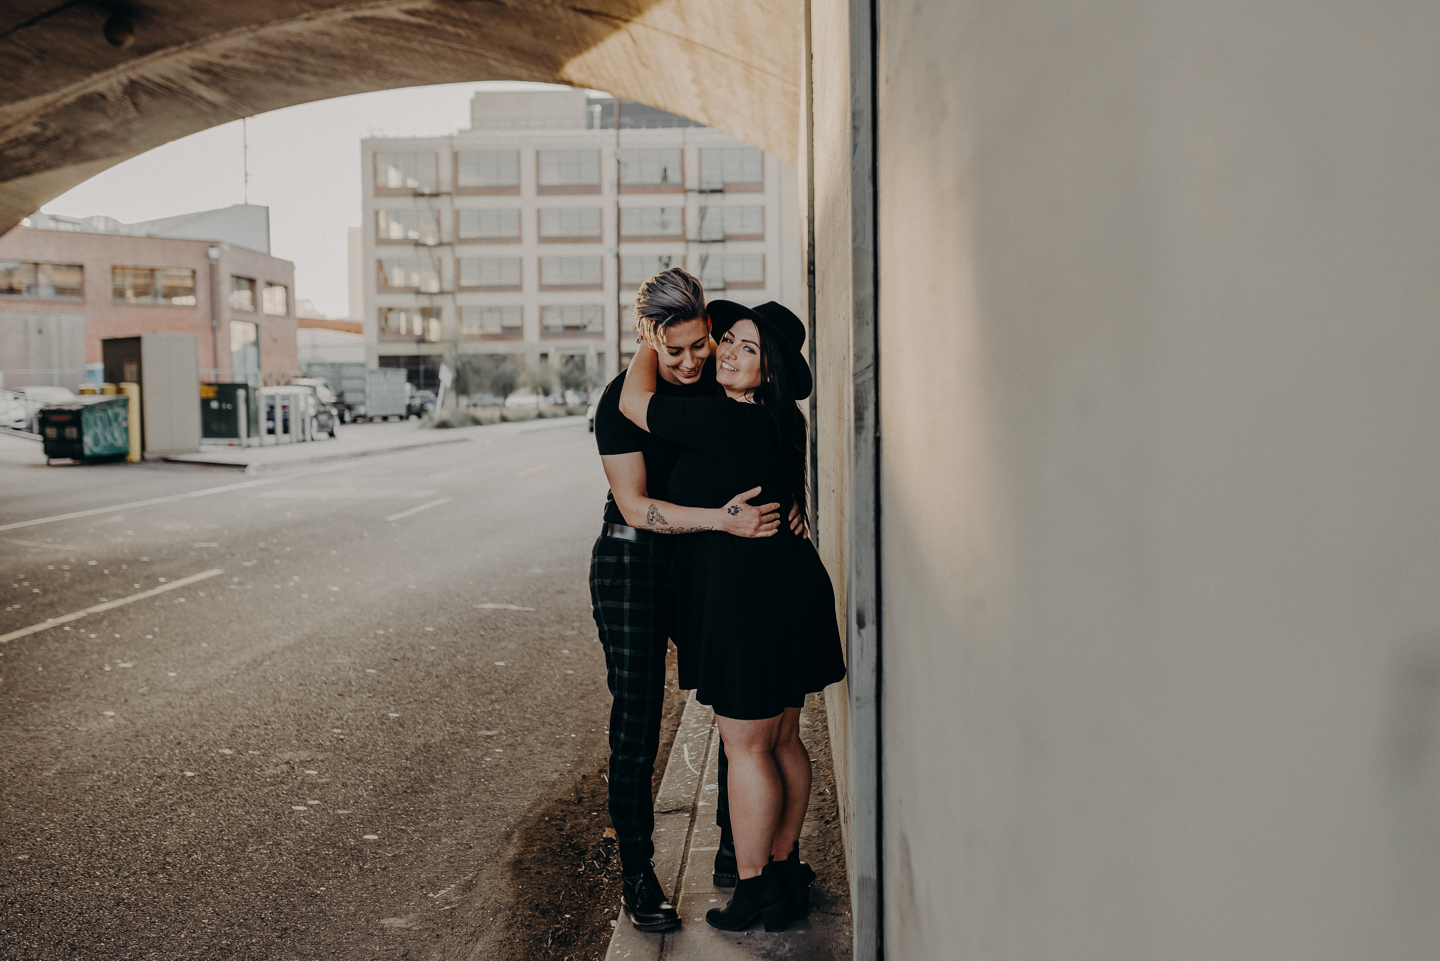 queer wedding photographer in los angeles - lesbian engagement session los angeles - isaiahandtaylor.com-019.jpg